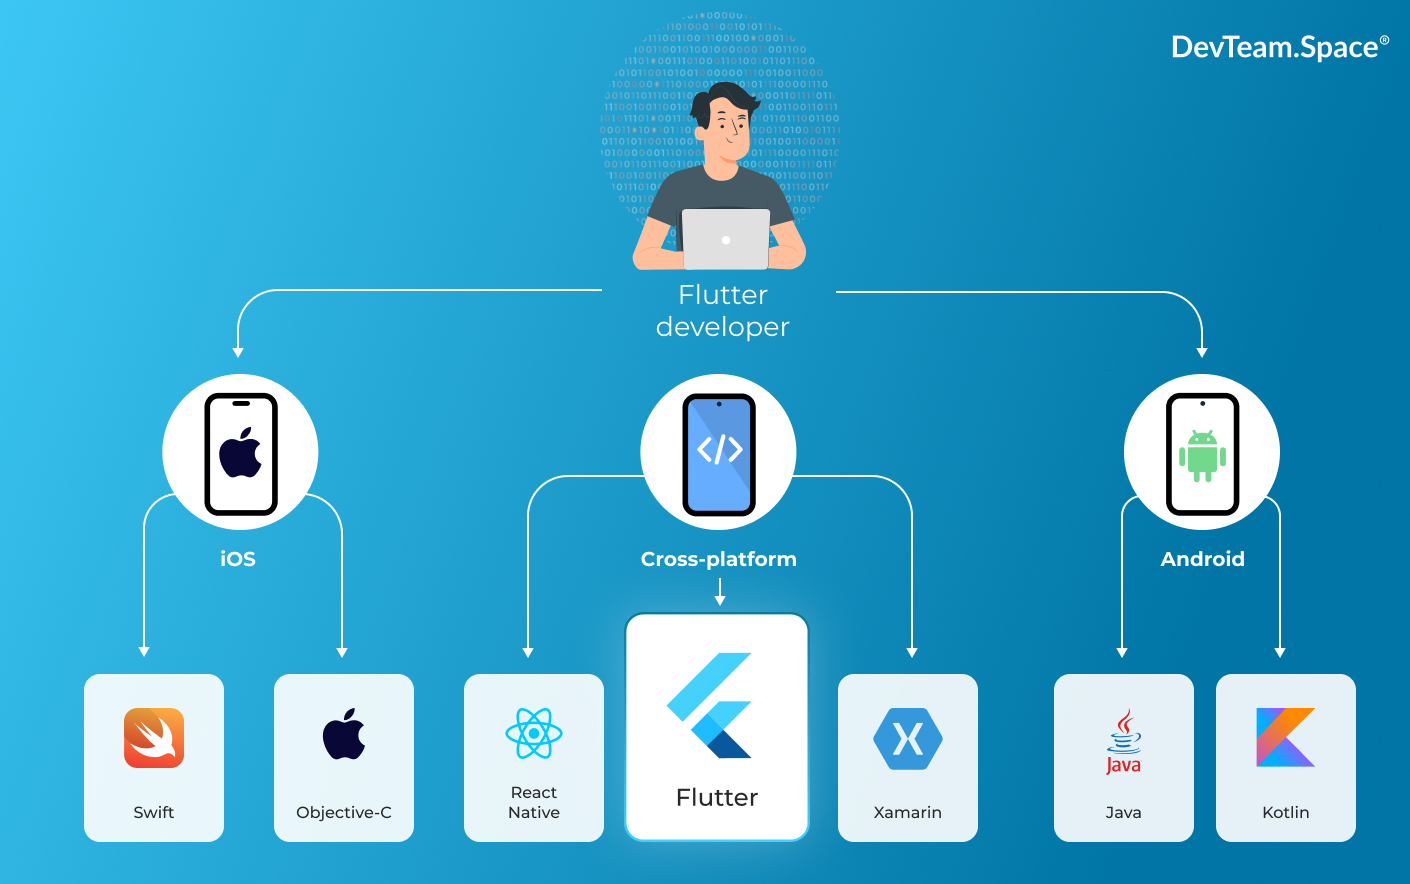 An image of a Flutter developer sitting at the laptop, three cellphone screens showing iOS, cross-platform, and Android apps, and the logos of respective programming languages and development frameworks (Swift and Objective-C for iOS, React Native, Flutter and Xamarin for cross-platform, and Java and Kotlin for Android